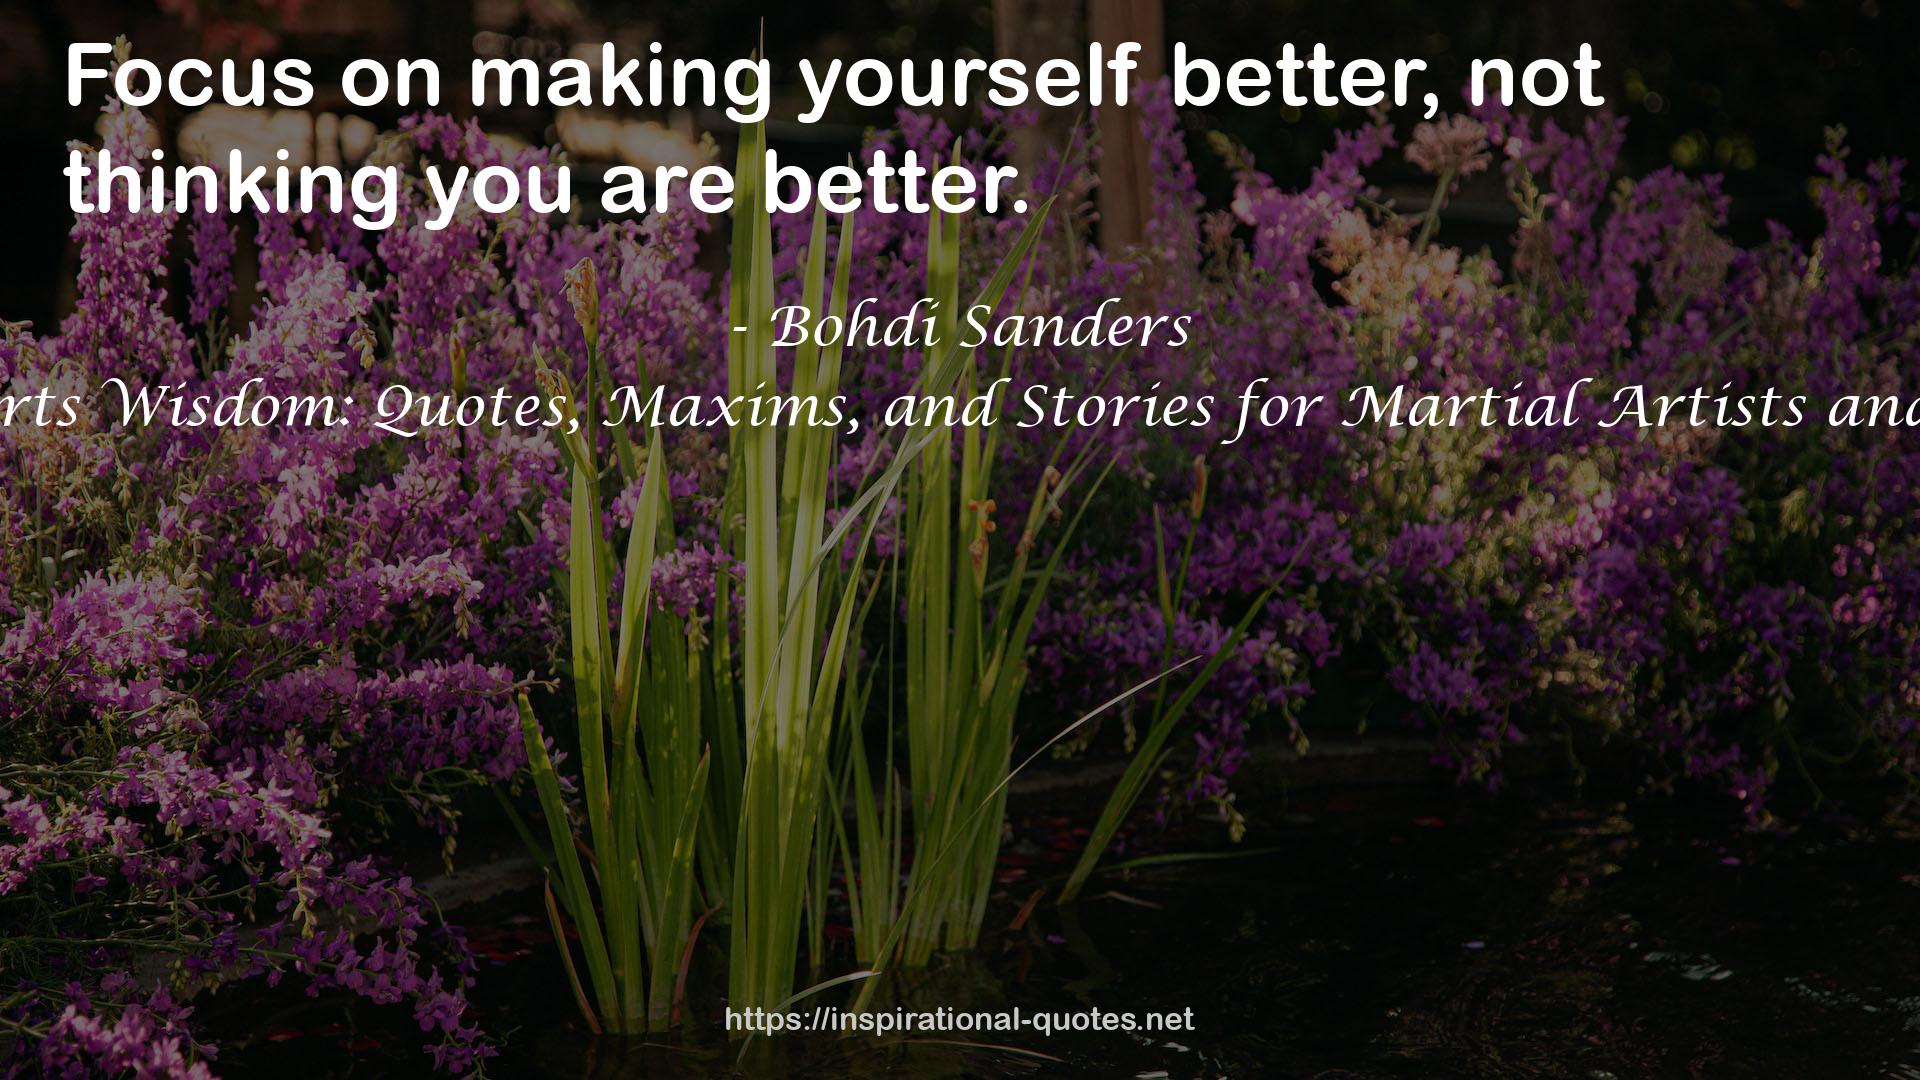 Martial Arts Wisdom: Quotes, Maxims, and Stories for Martial Artists and Warriors QUOTES